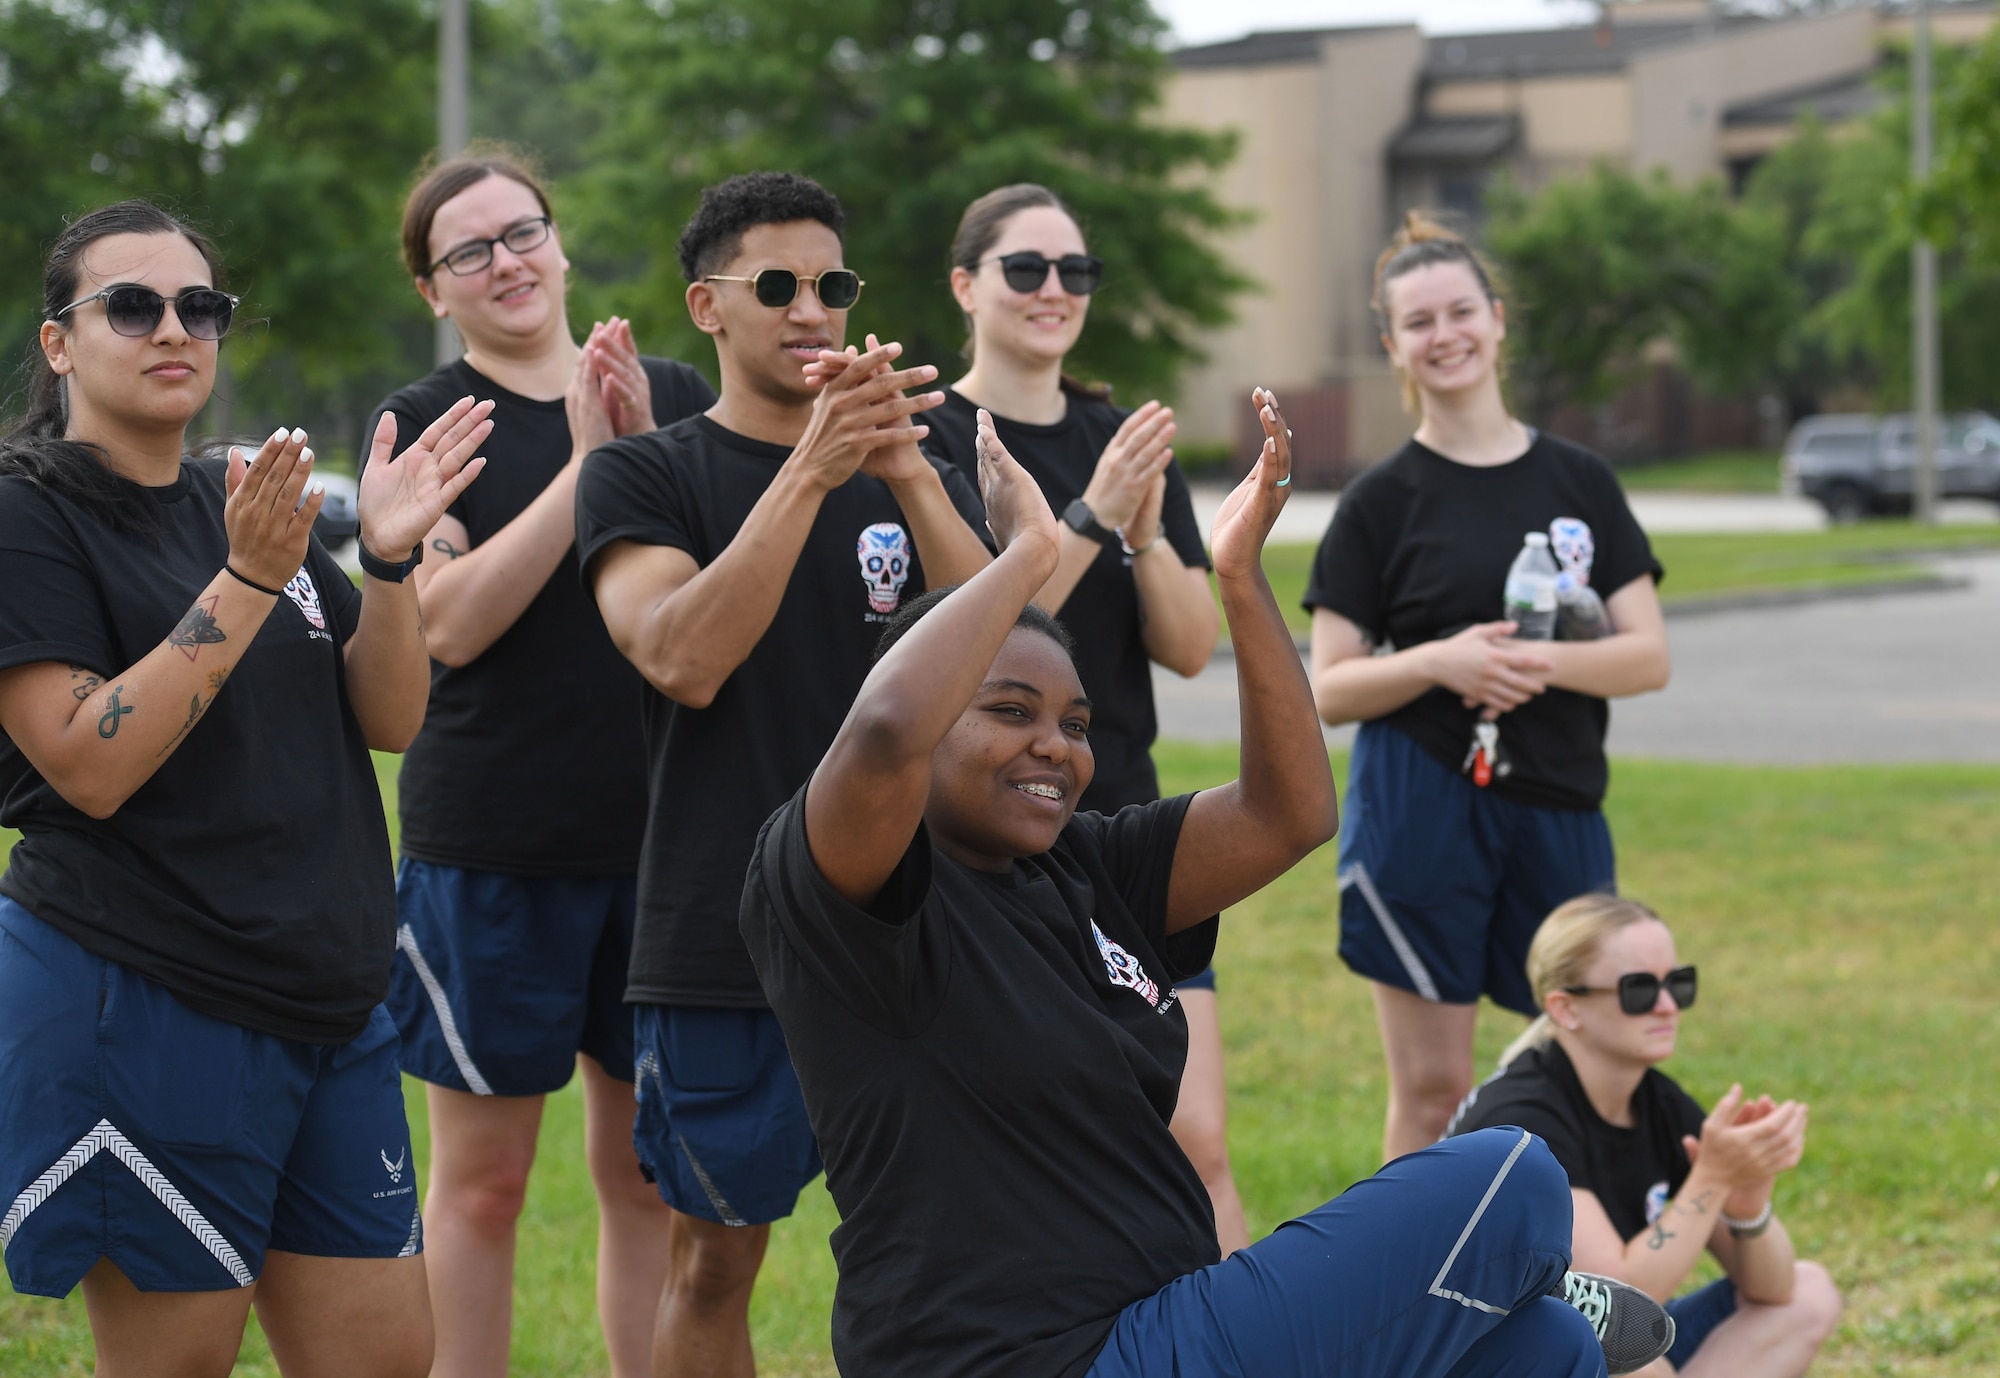 Airman Leadership School students cheer on their teammates during the Sexual Assault and Awareness Prevention Month volleyball tournament at Keesler Air Force Base, Mississippi, April 29, 2022. More than 20 teams competed in the event, which was held in acknowledgment of Sexual Assault and Awareness Prevention Month throughout April. (U.S. Air Force photo by Kemberly Groue)